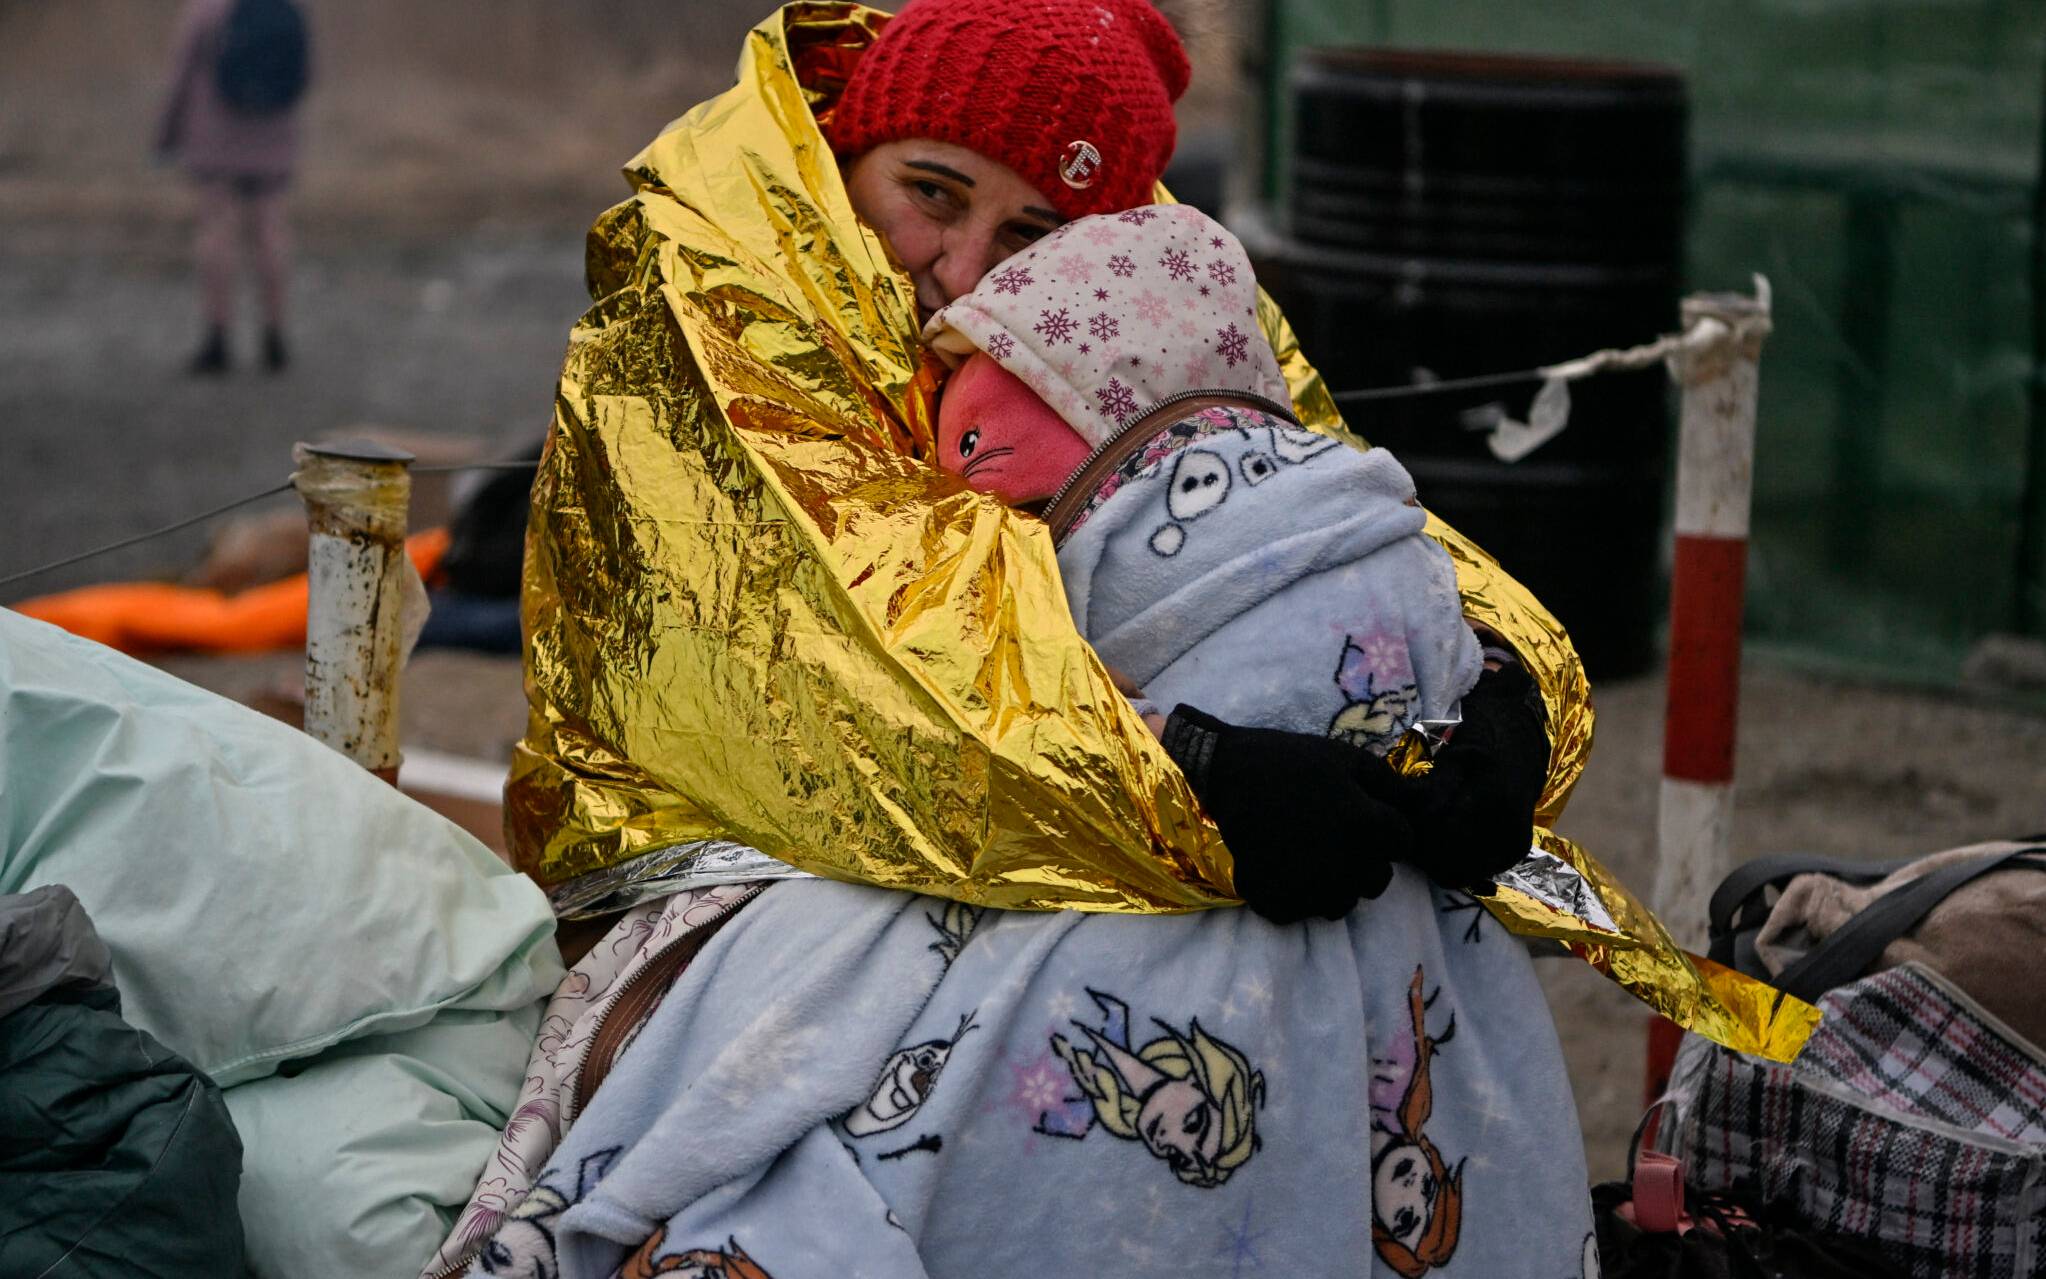 A woman hugs her grandaugther as people wait in freezing cold temperatures to be transferred to a train station, after crossing the Ukrainian borders into Poland, at the Medyka border crossing in Poland, on March 7, 2022. - More than 1,5 million people have fled Ukraine since the start of the Russian invasion, according to the latest UN data on March 6, 2022. (Photo by Louisa GOULIAMAKI / AFP)